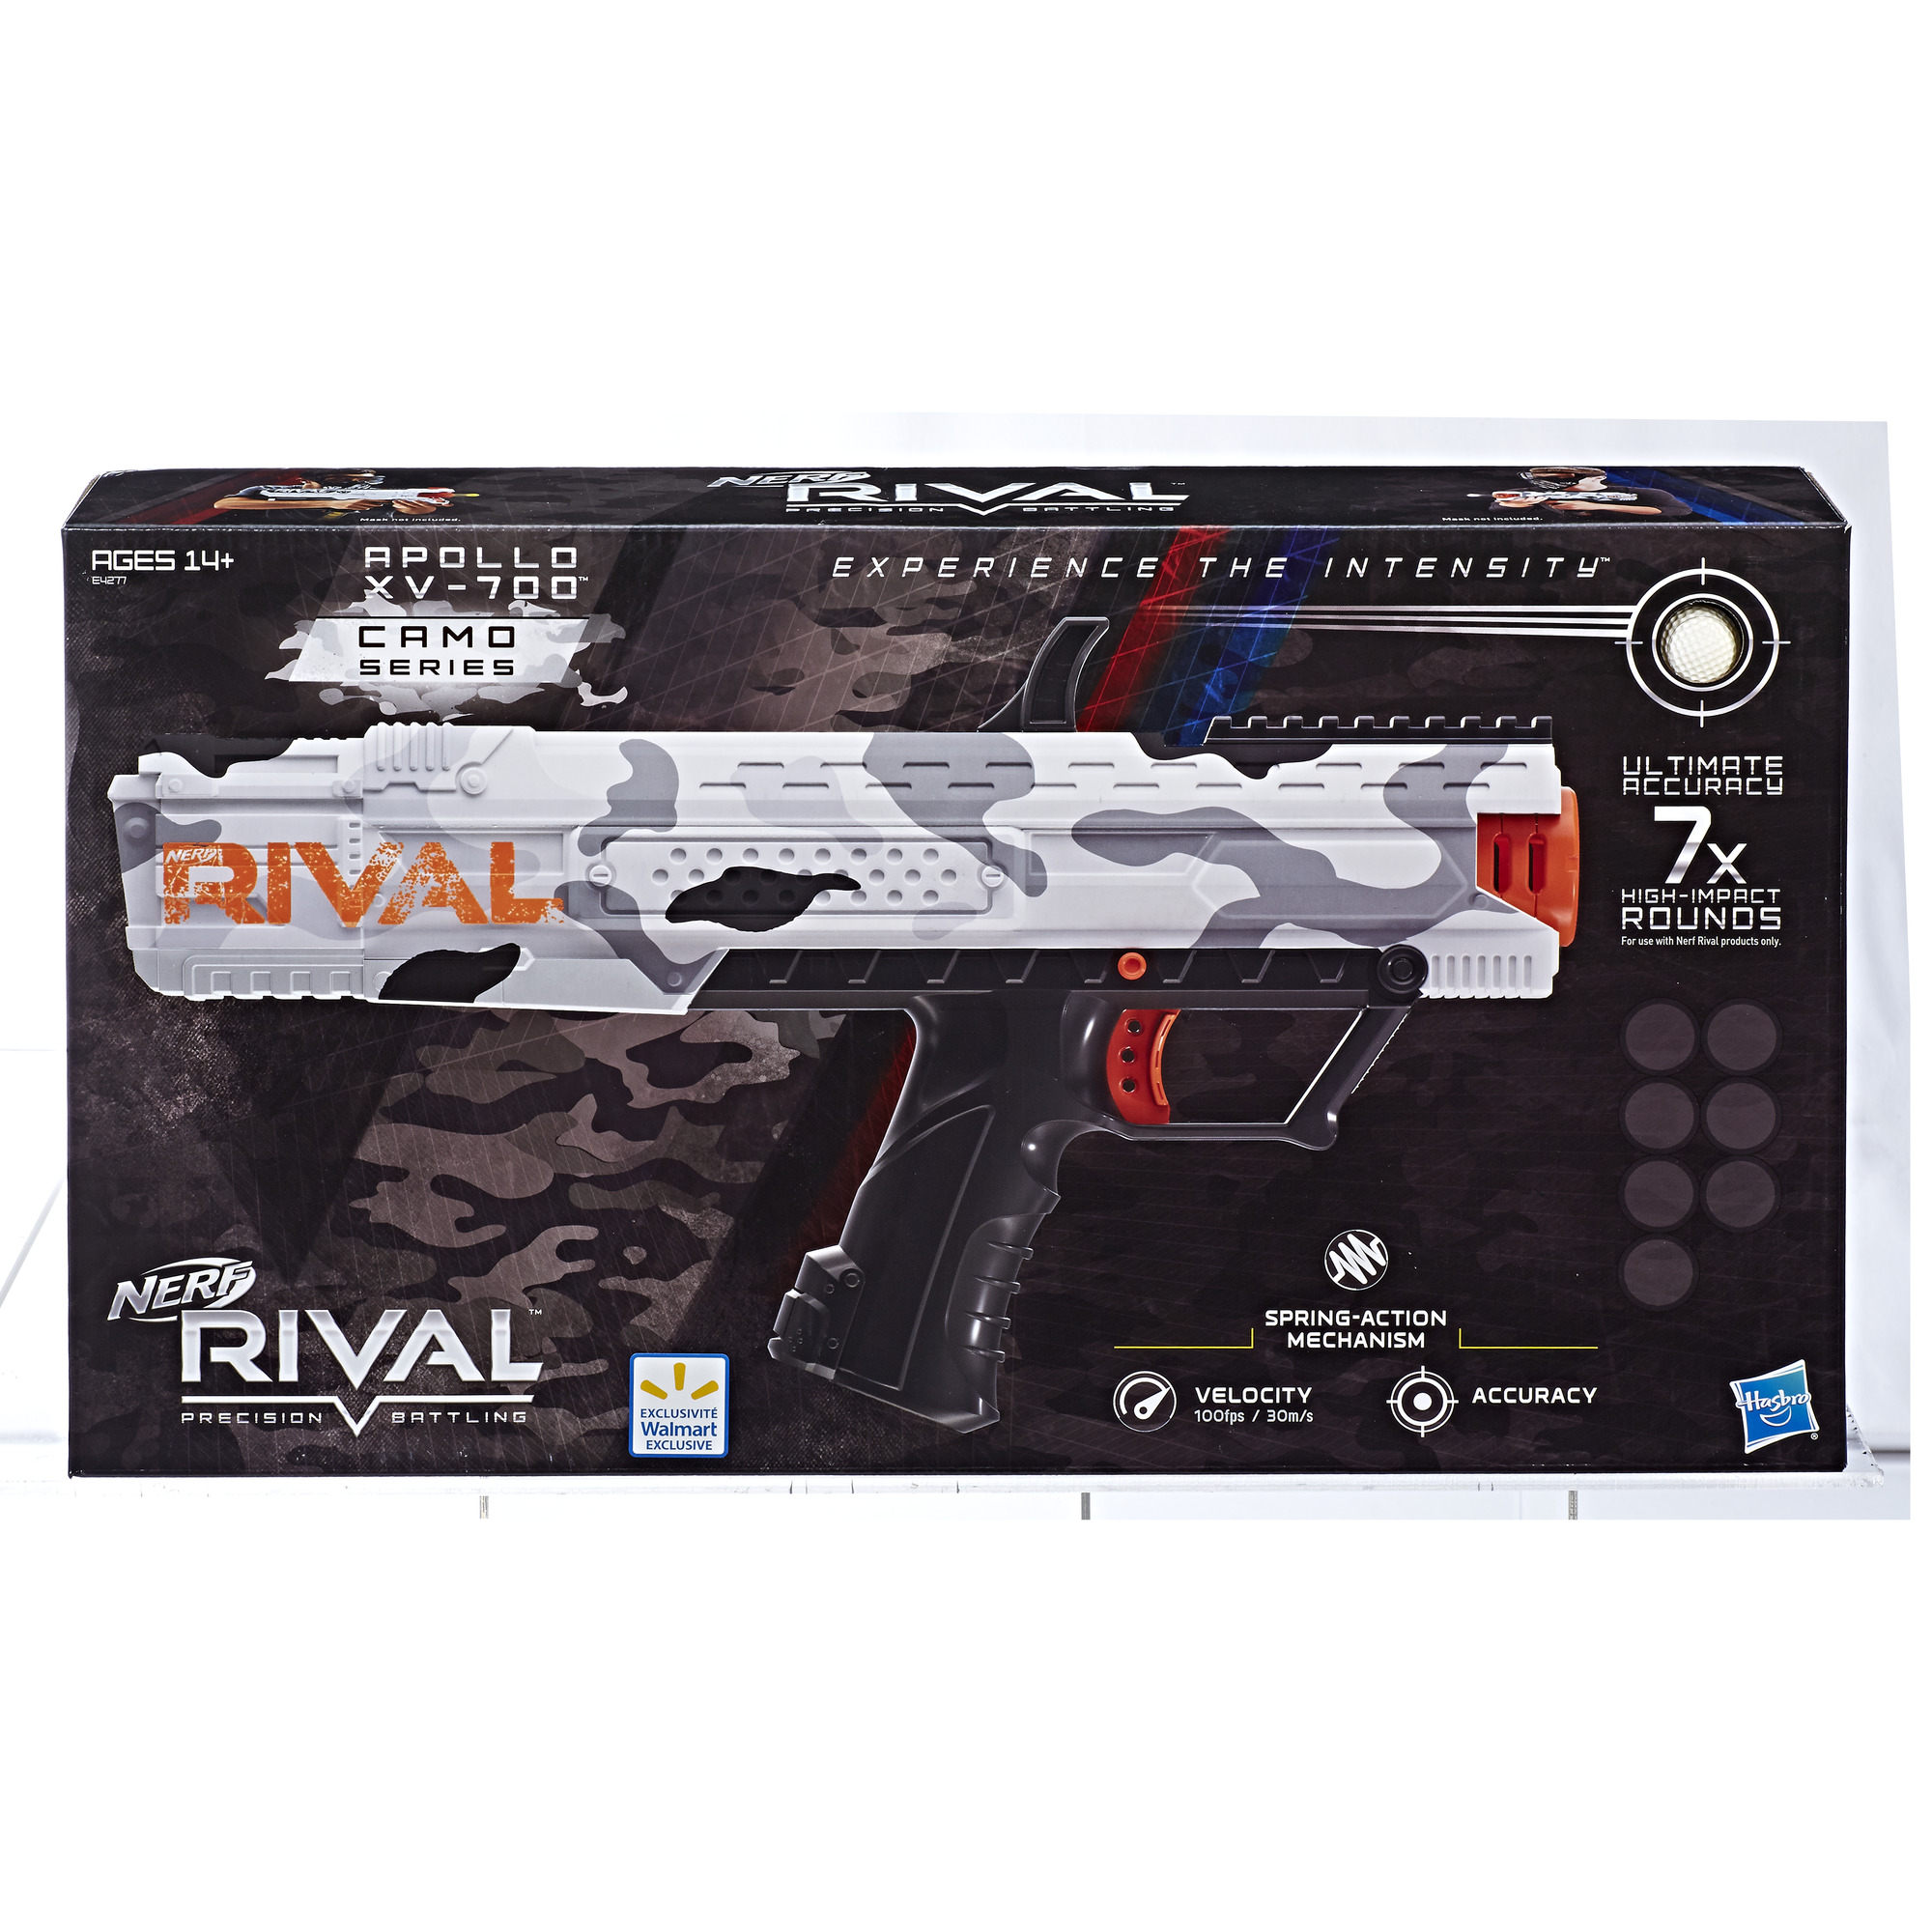 Nerf Rival Apollo XV-700 Camo Series Toy Blaster with 7 Ball Dart Rounds for Ages 14 and Up - image 3 of 12